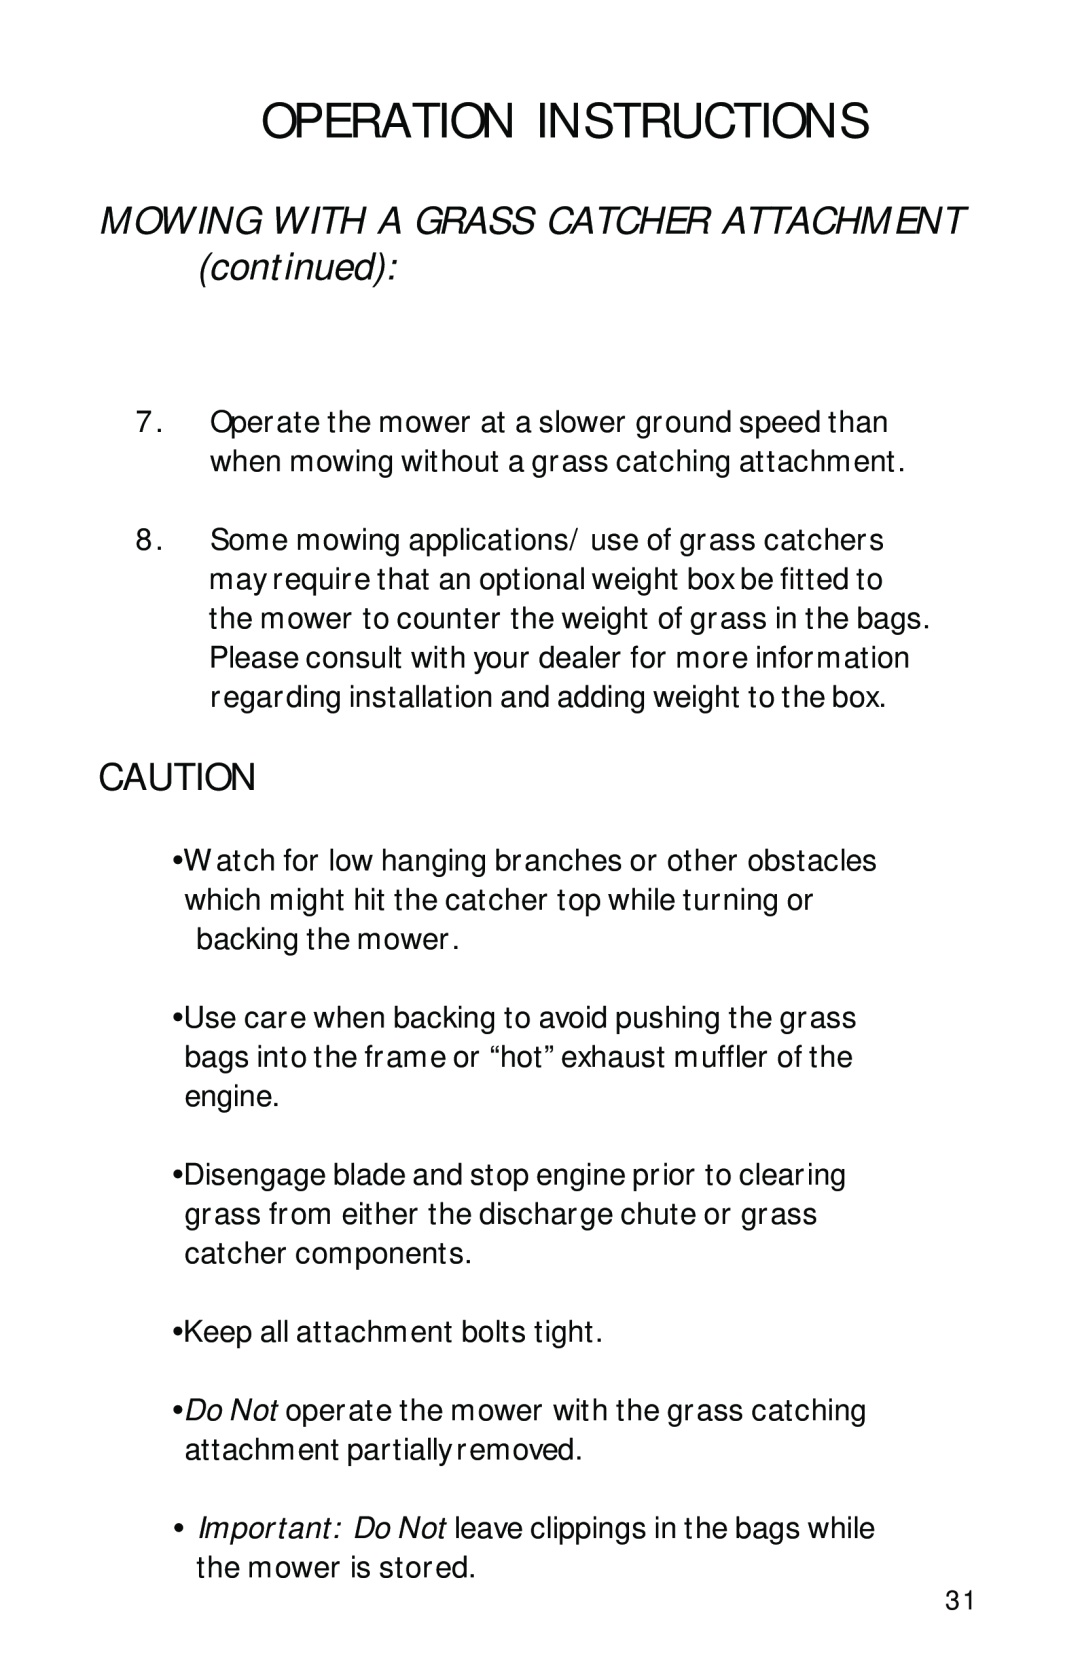 Dixon ZTR 2300 manual MOWING WITH A GRASS CATCHER ATTACHMENT continued, Operation Instructions 